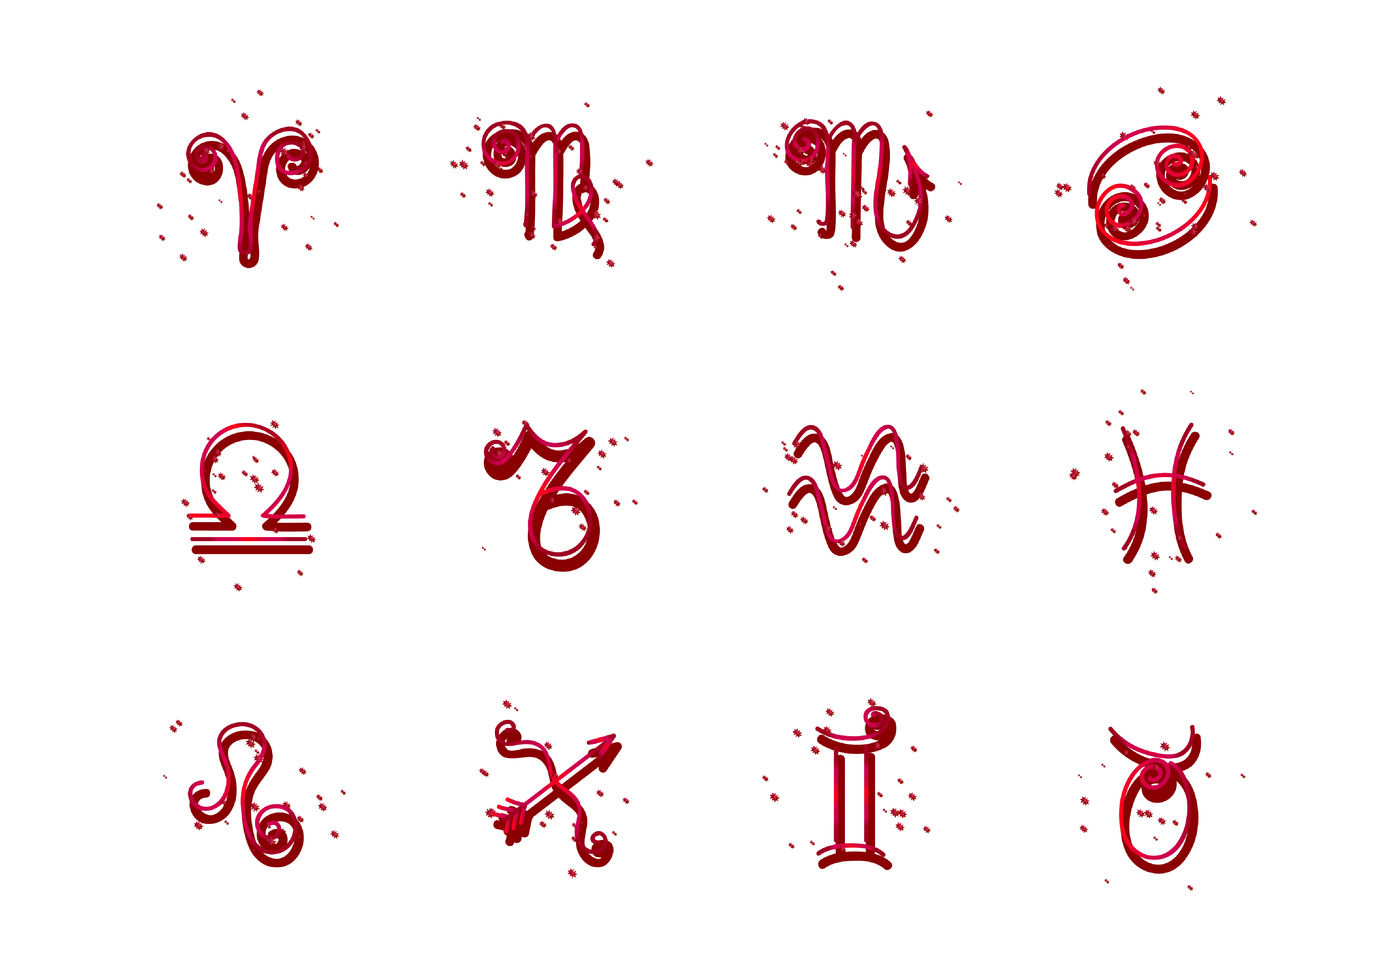 Set of icons of signs of zodiac. The image can be used for print, online,  and in any size of excellent quality. The archive contains 2 - EPS 10, 5 -  PNG